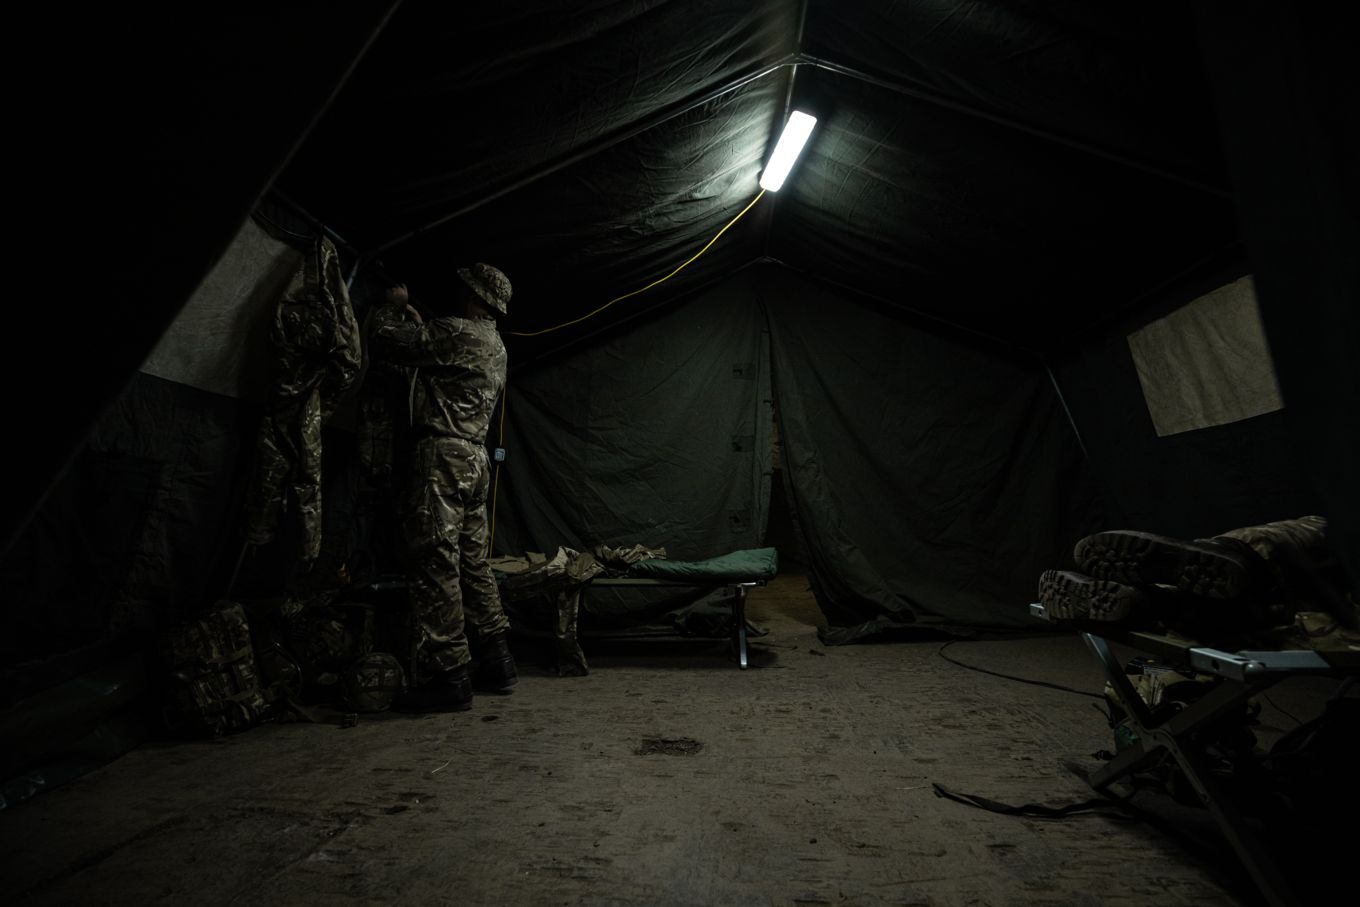 Sleeping quarters in operational conditions